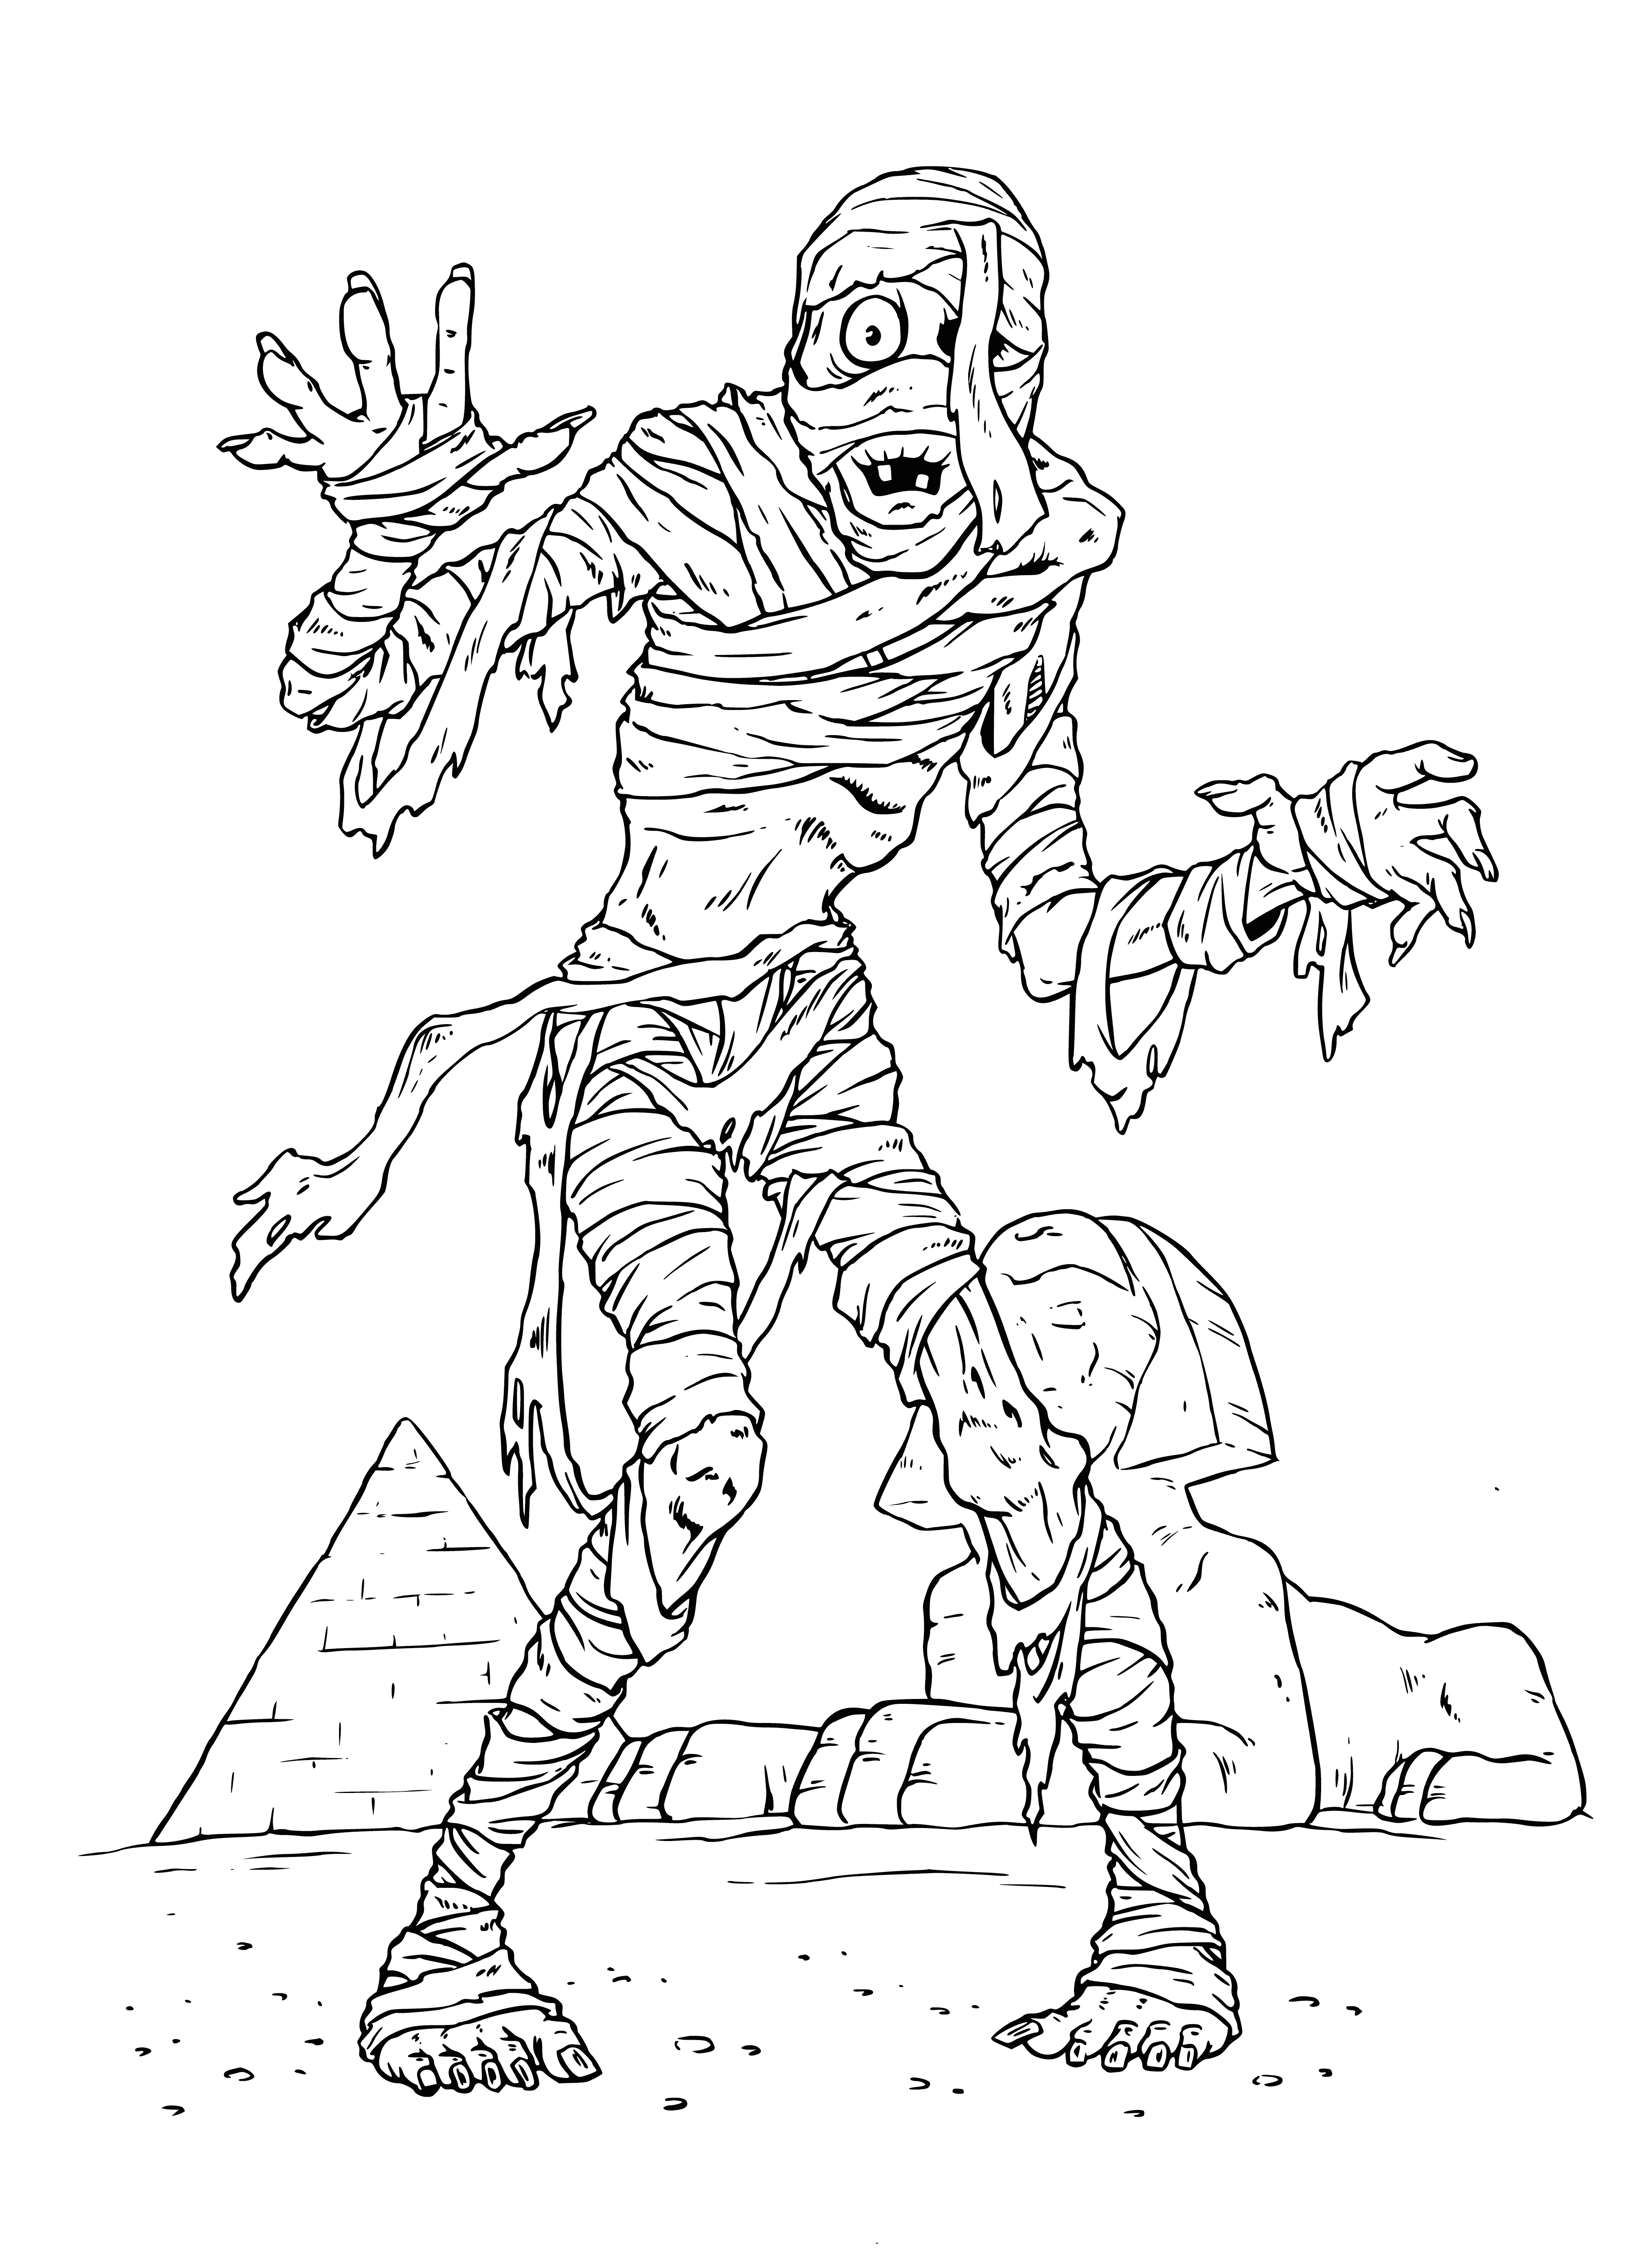 coloring page: Mummy is a preserved corpse, often found in tombs/pyramids to protect the body from the outside world.